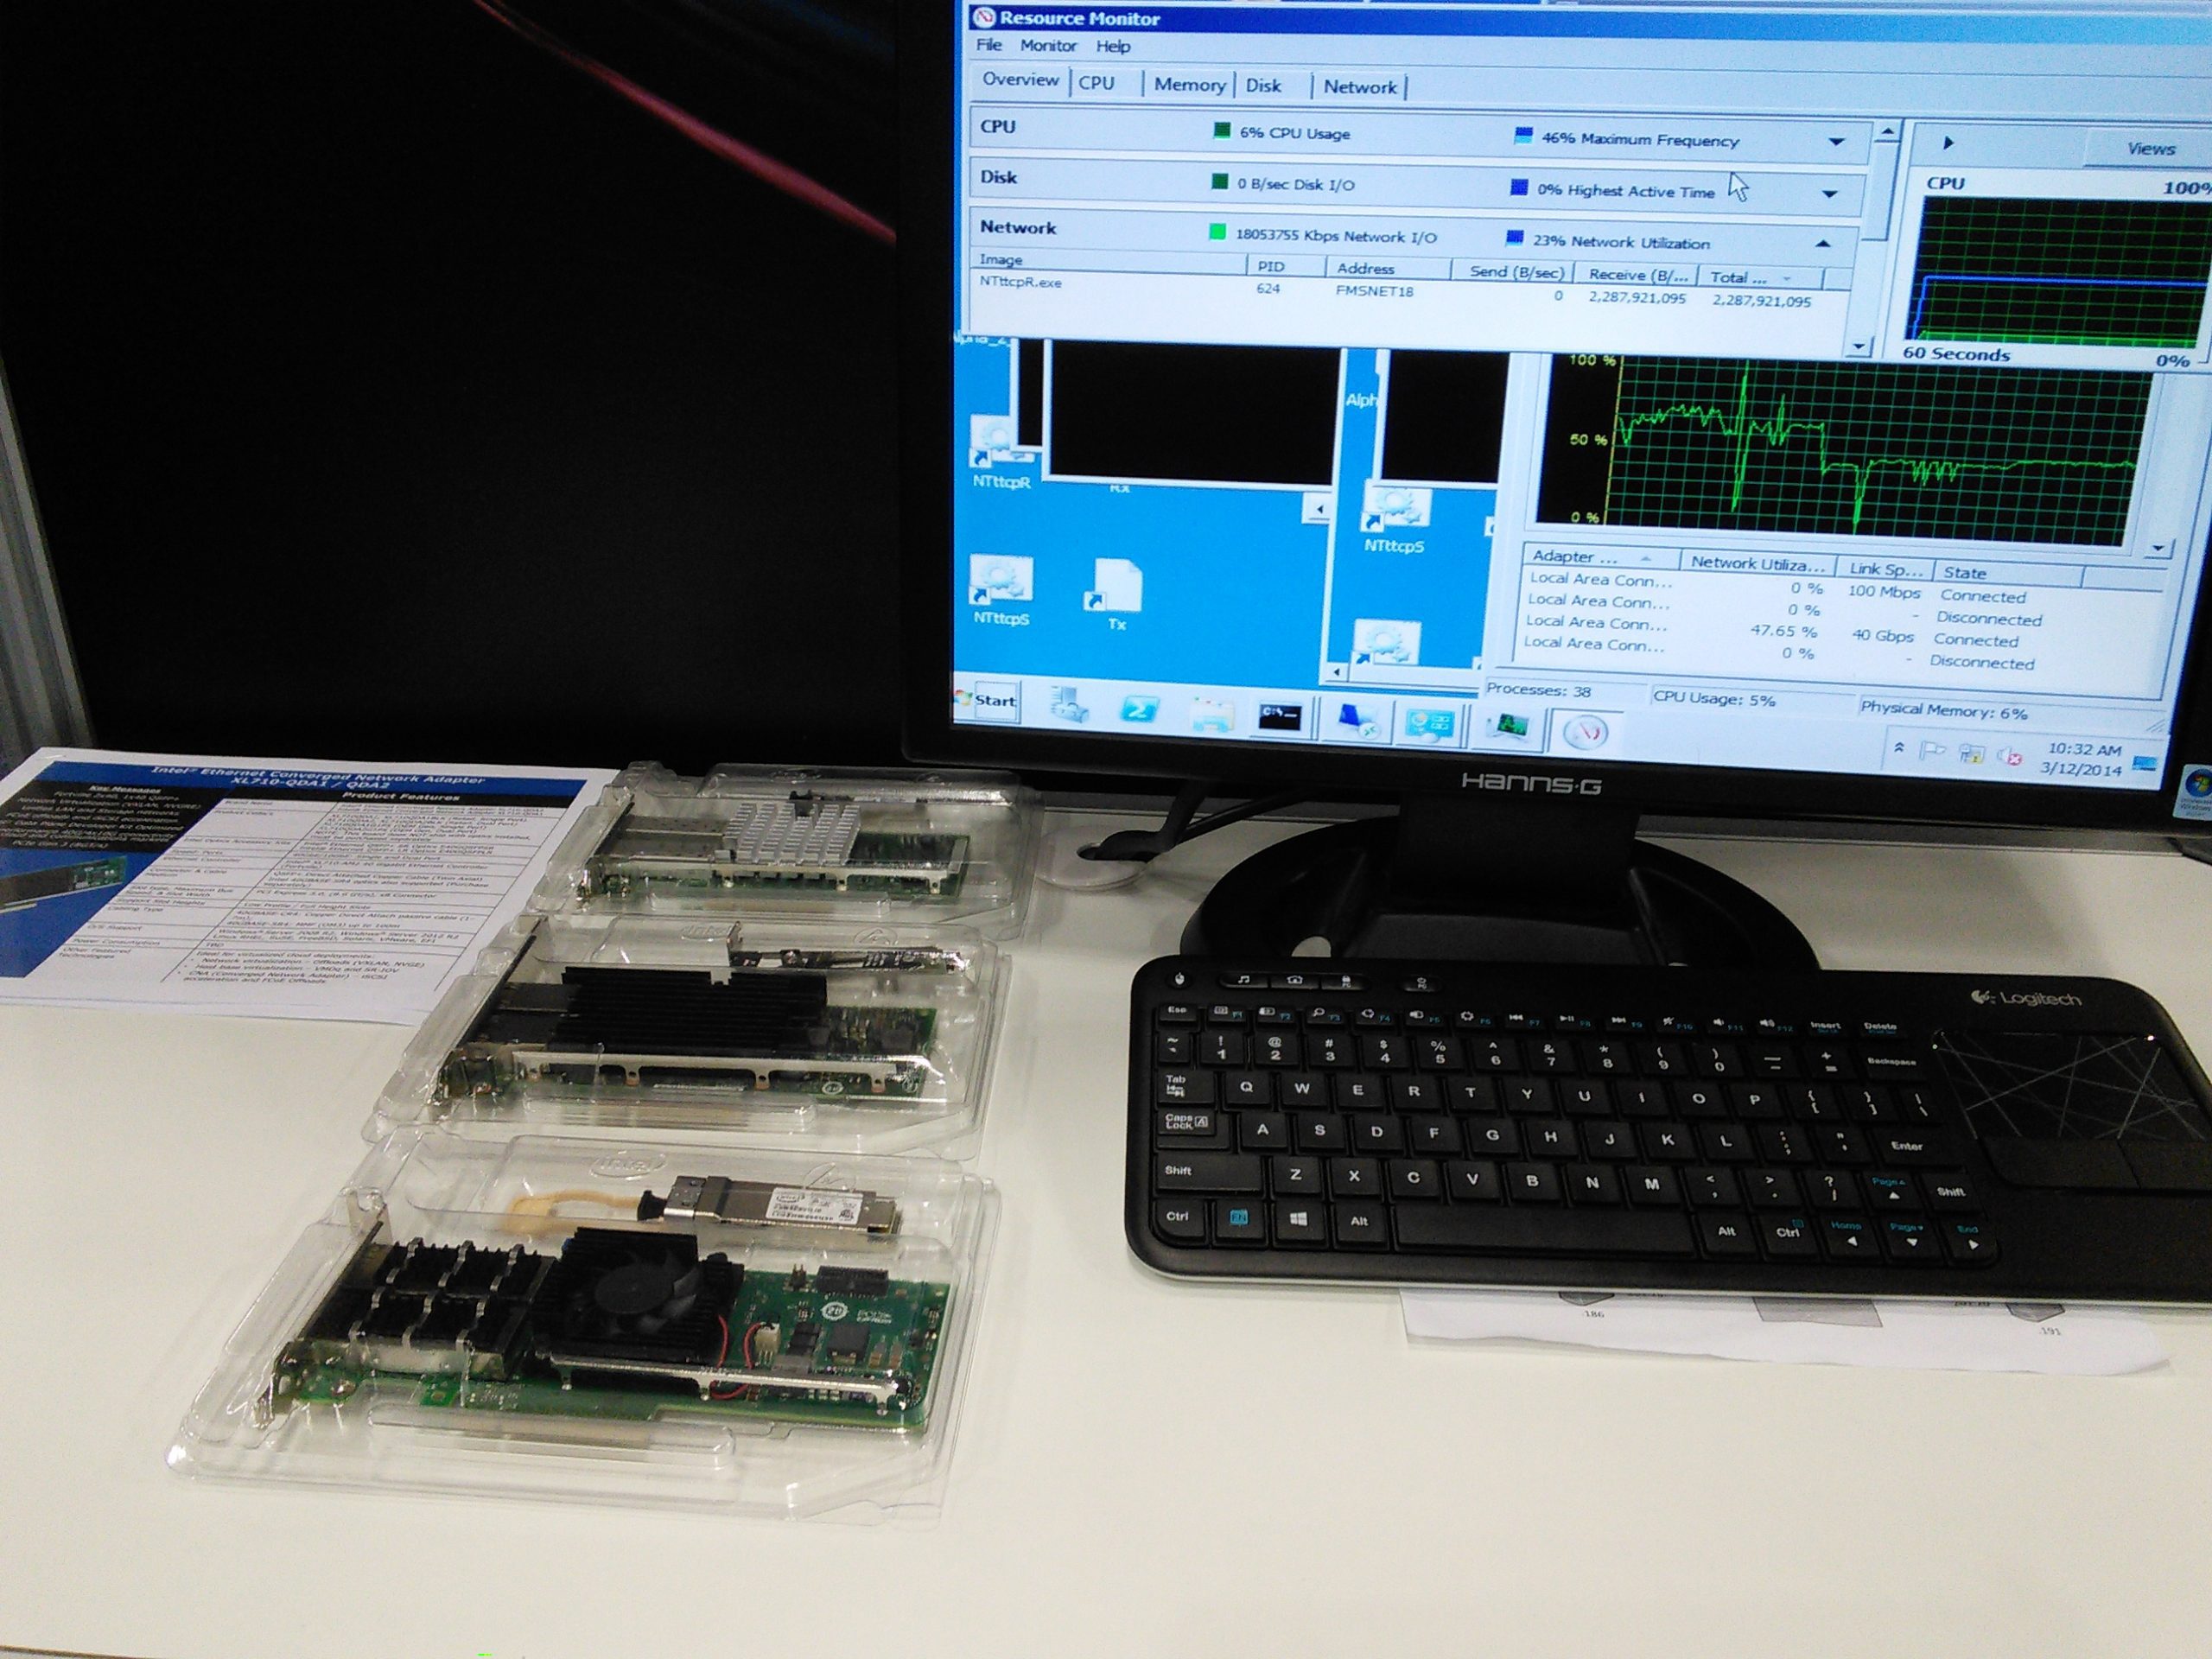 Ethernet Alliance OFC 2014 demo Intel converged network adapter